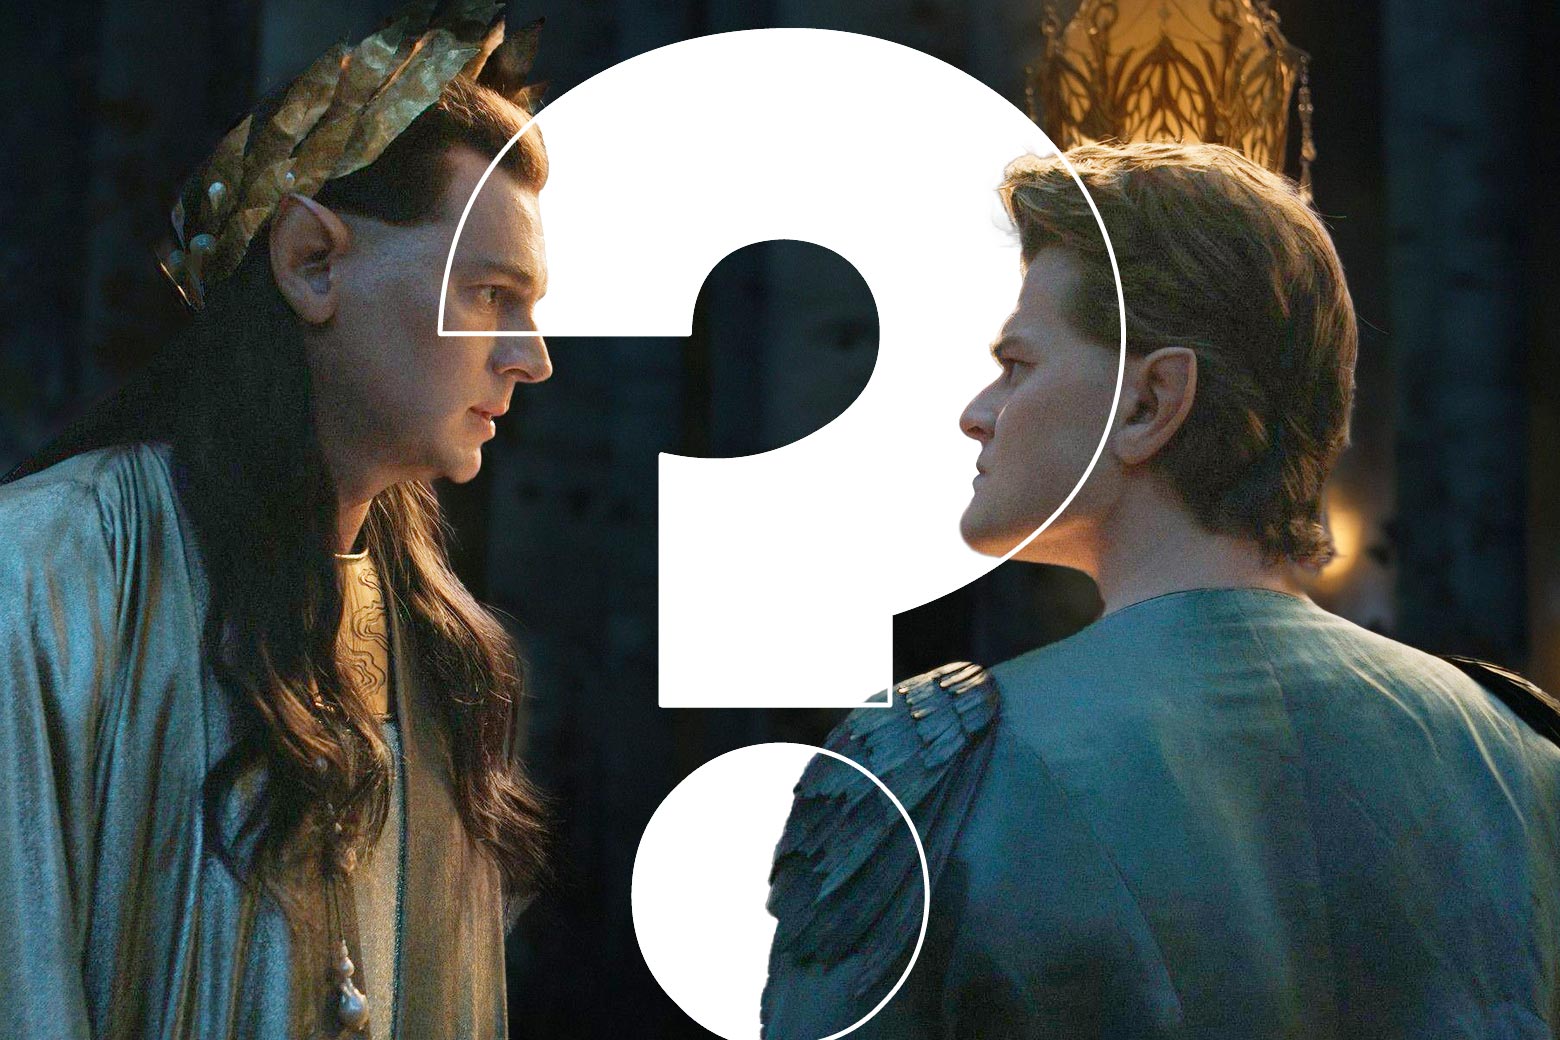 Two men face each other with a large white question mark imposed between them. One has long dark hair and wears a golden leaf crown. Both have pointed ears.